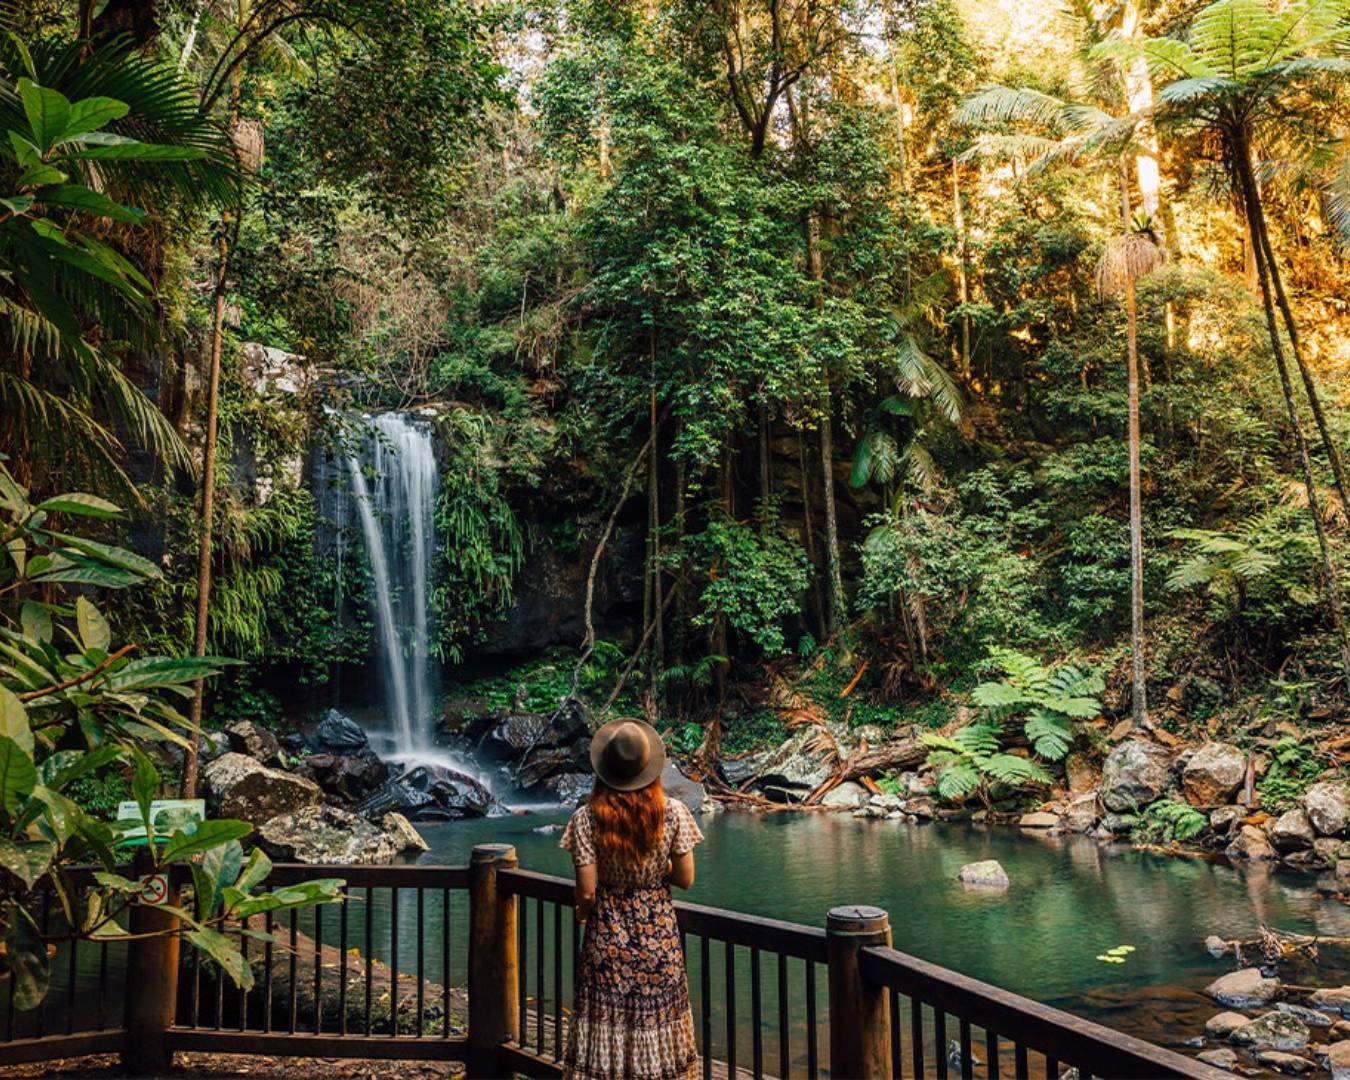 Lady looking at waterfall in rainforest 